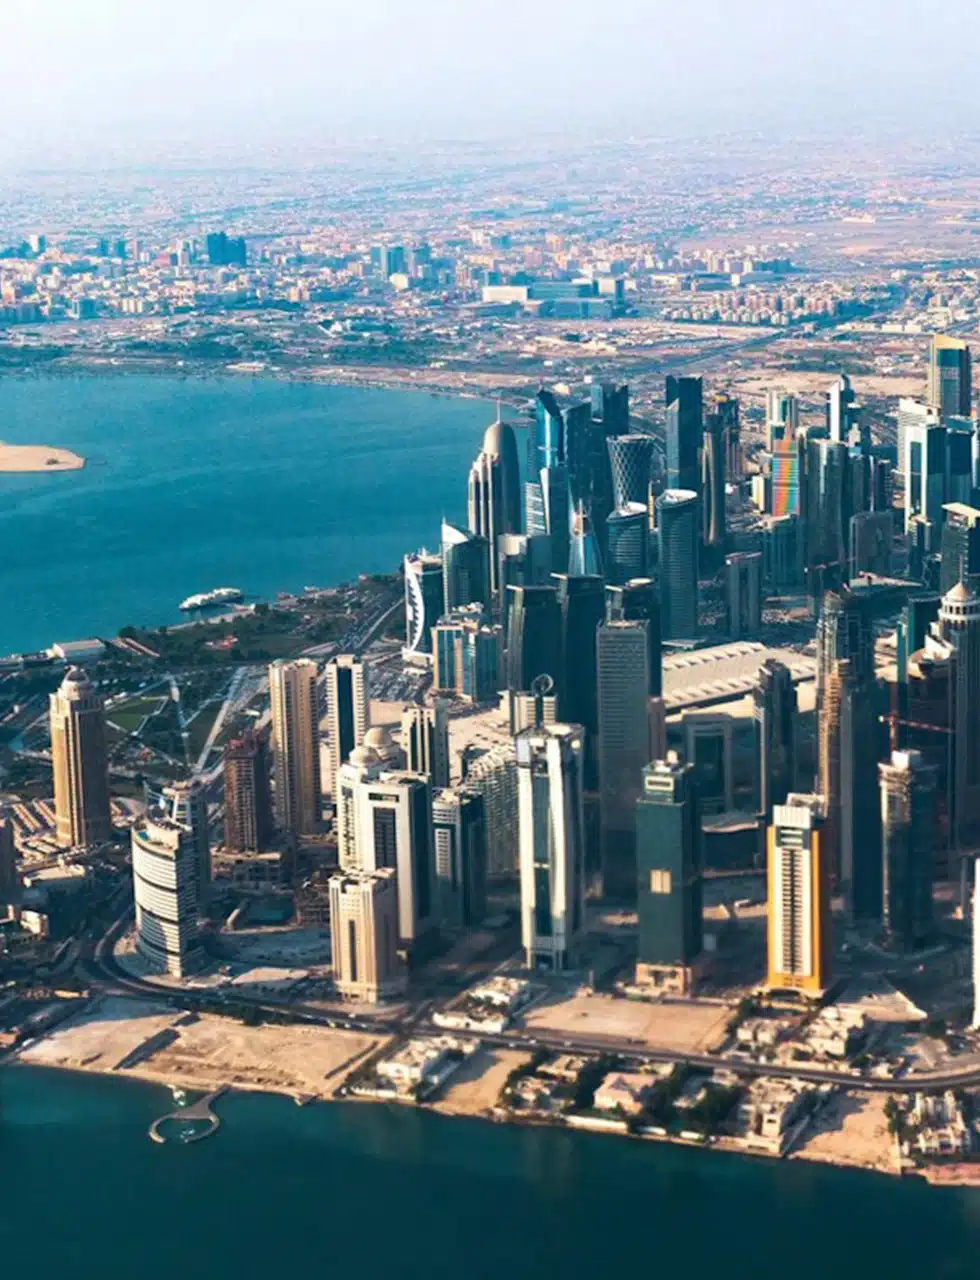 A picture of the Doha skyline. Katharine Pooley has completed many projects in the Middle East